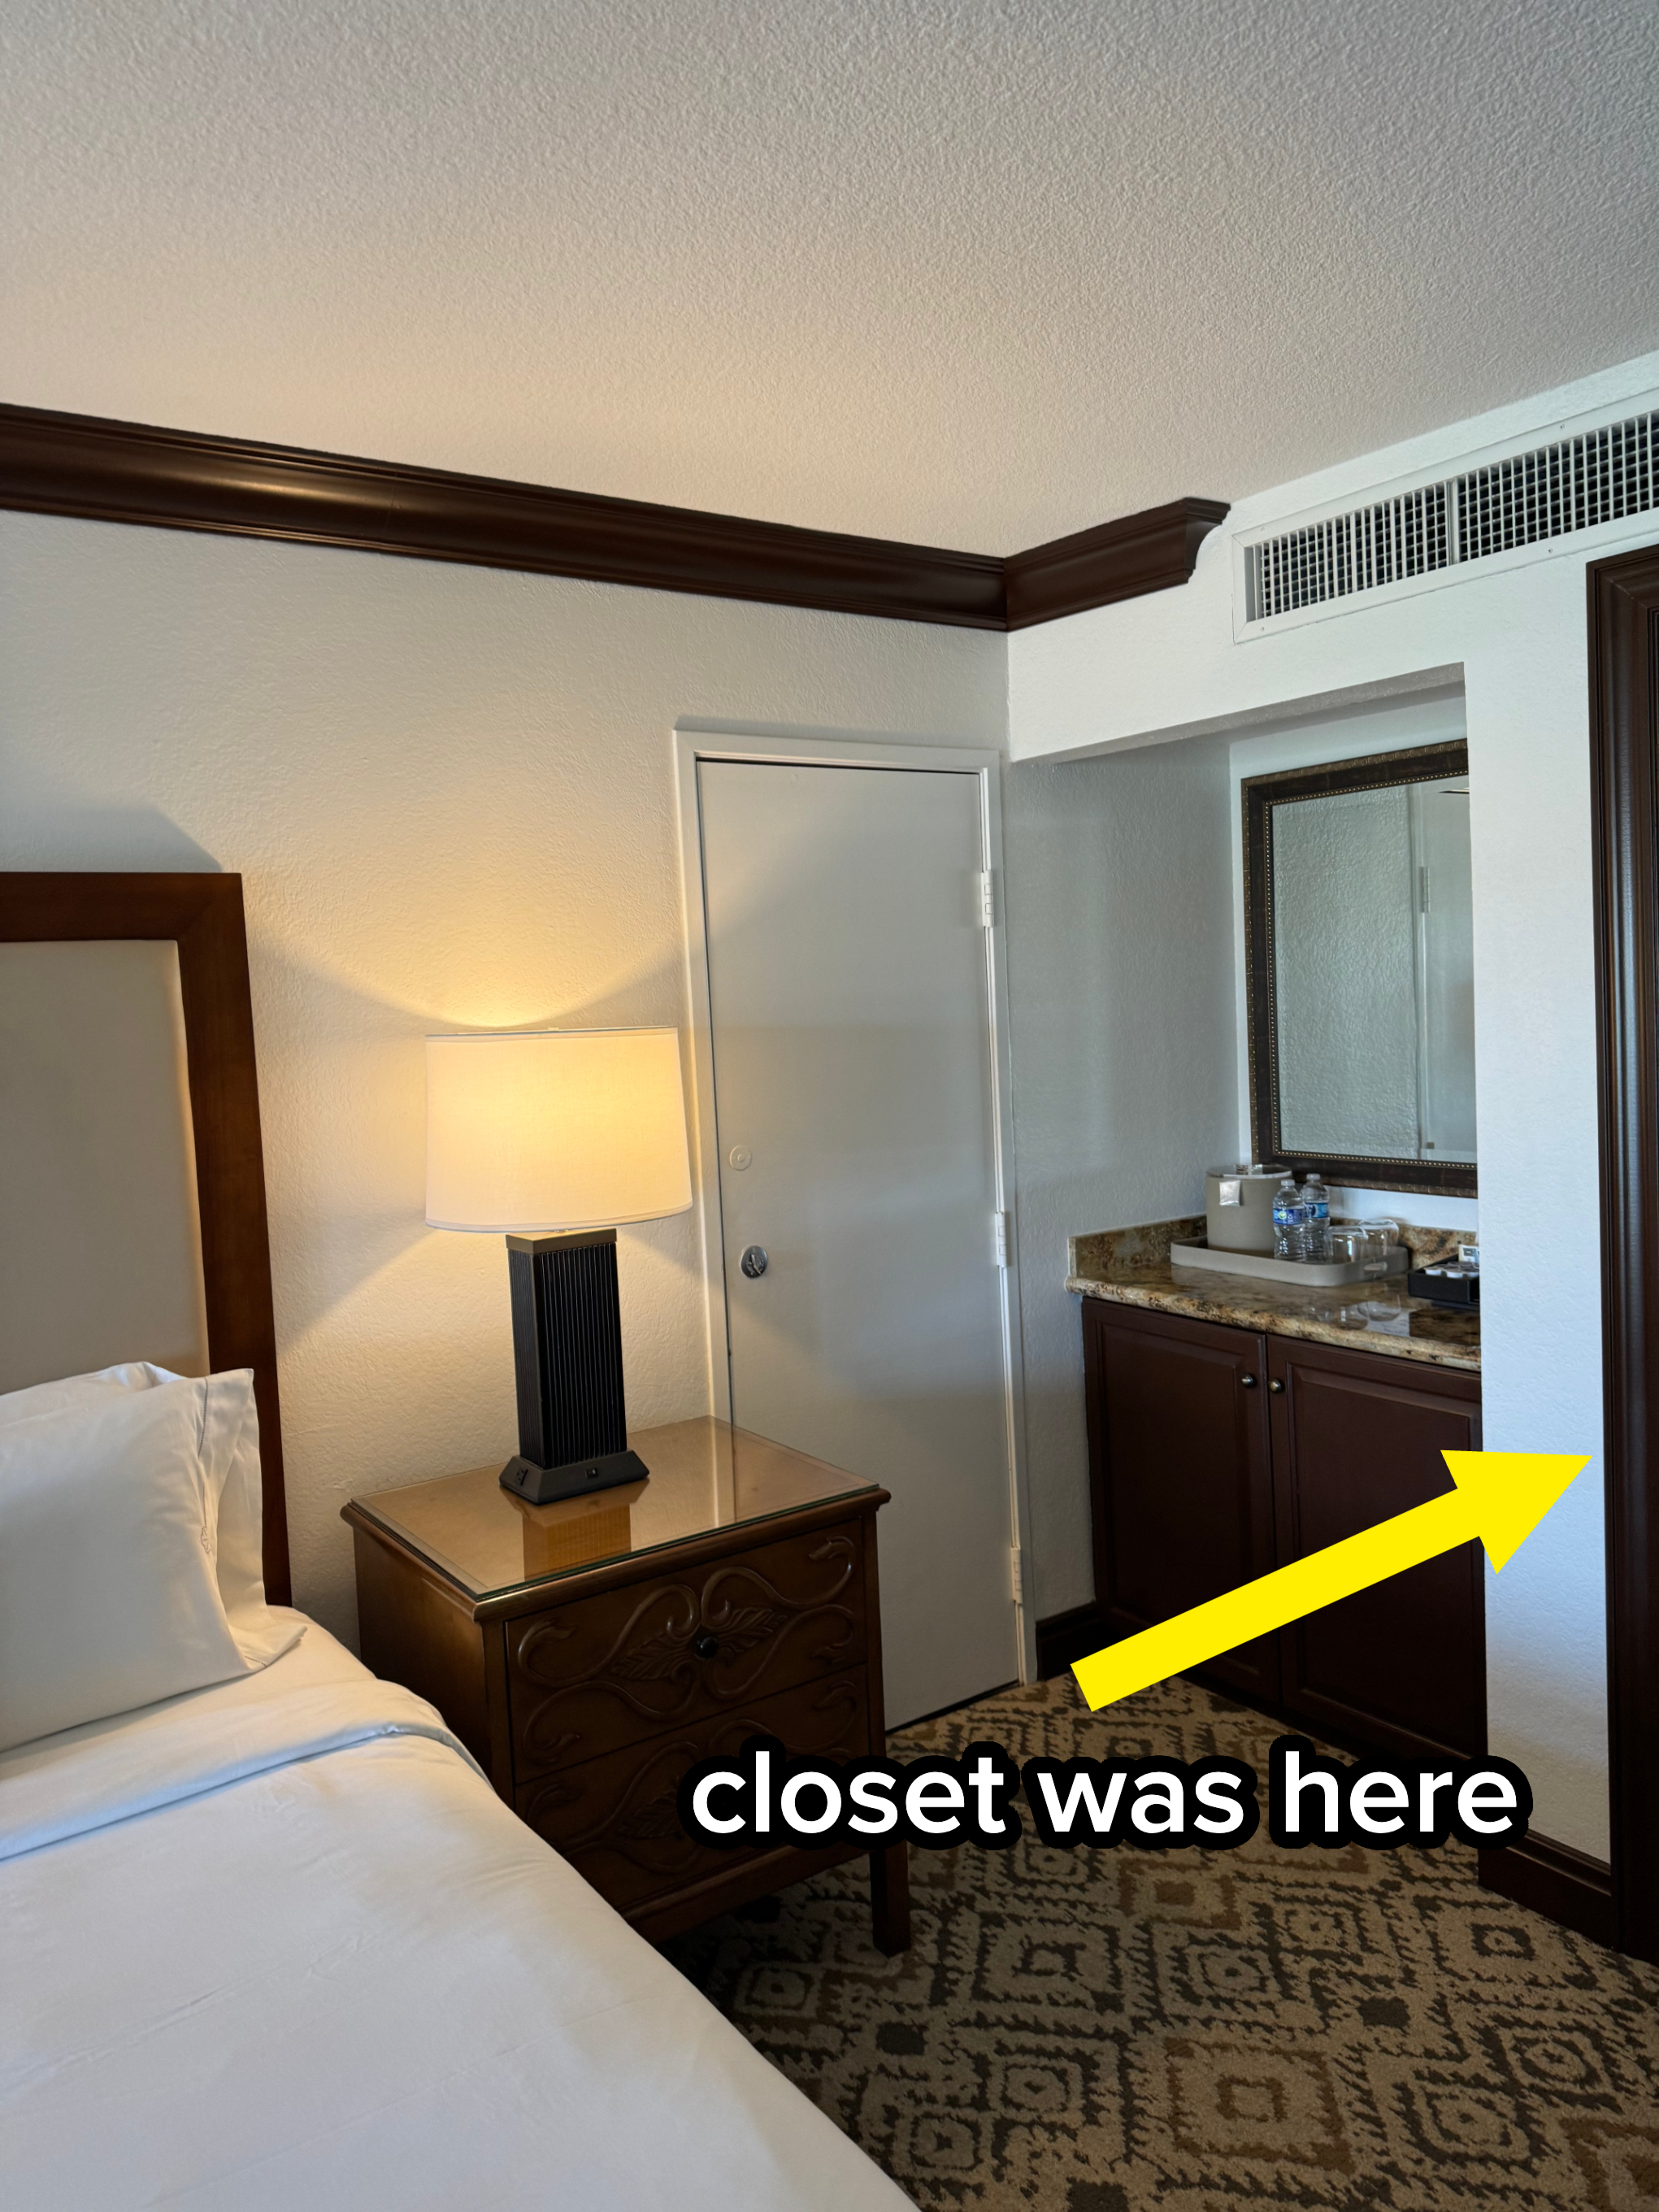 Hotel room with a bed, nightstand, lamp, and visible bathroom area